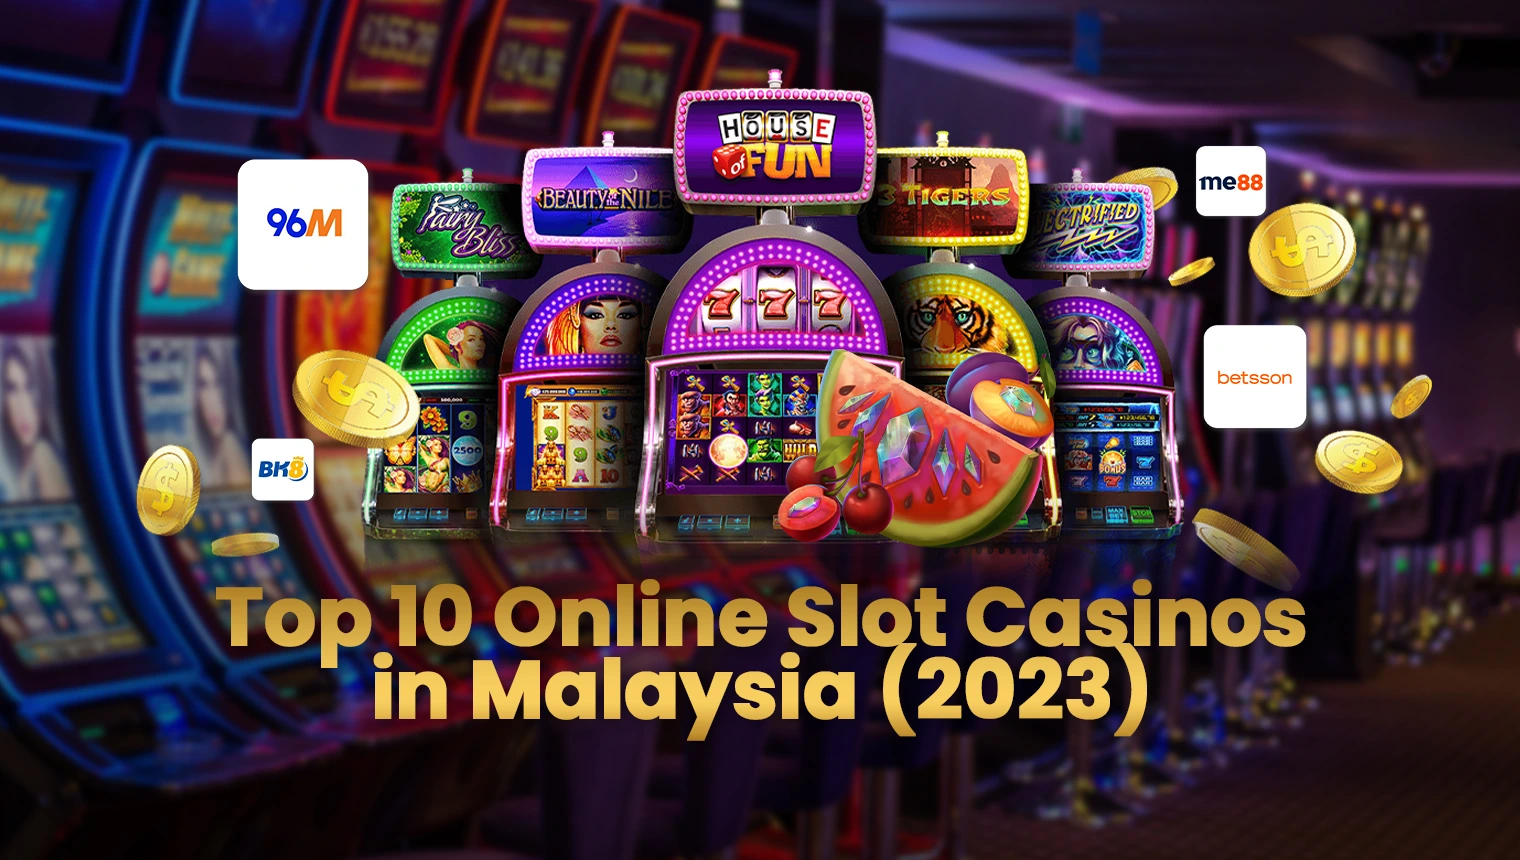 Top 10 Online Slot Casinos in Malaysia (2023)